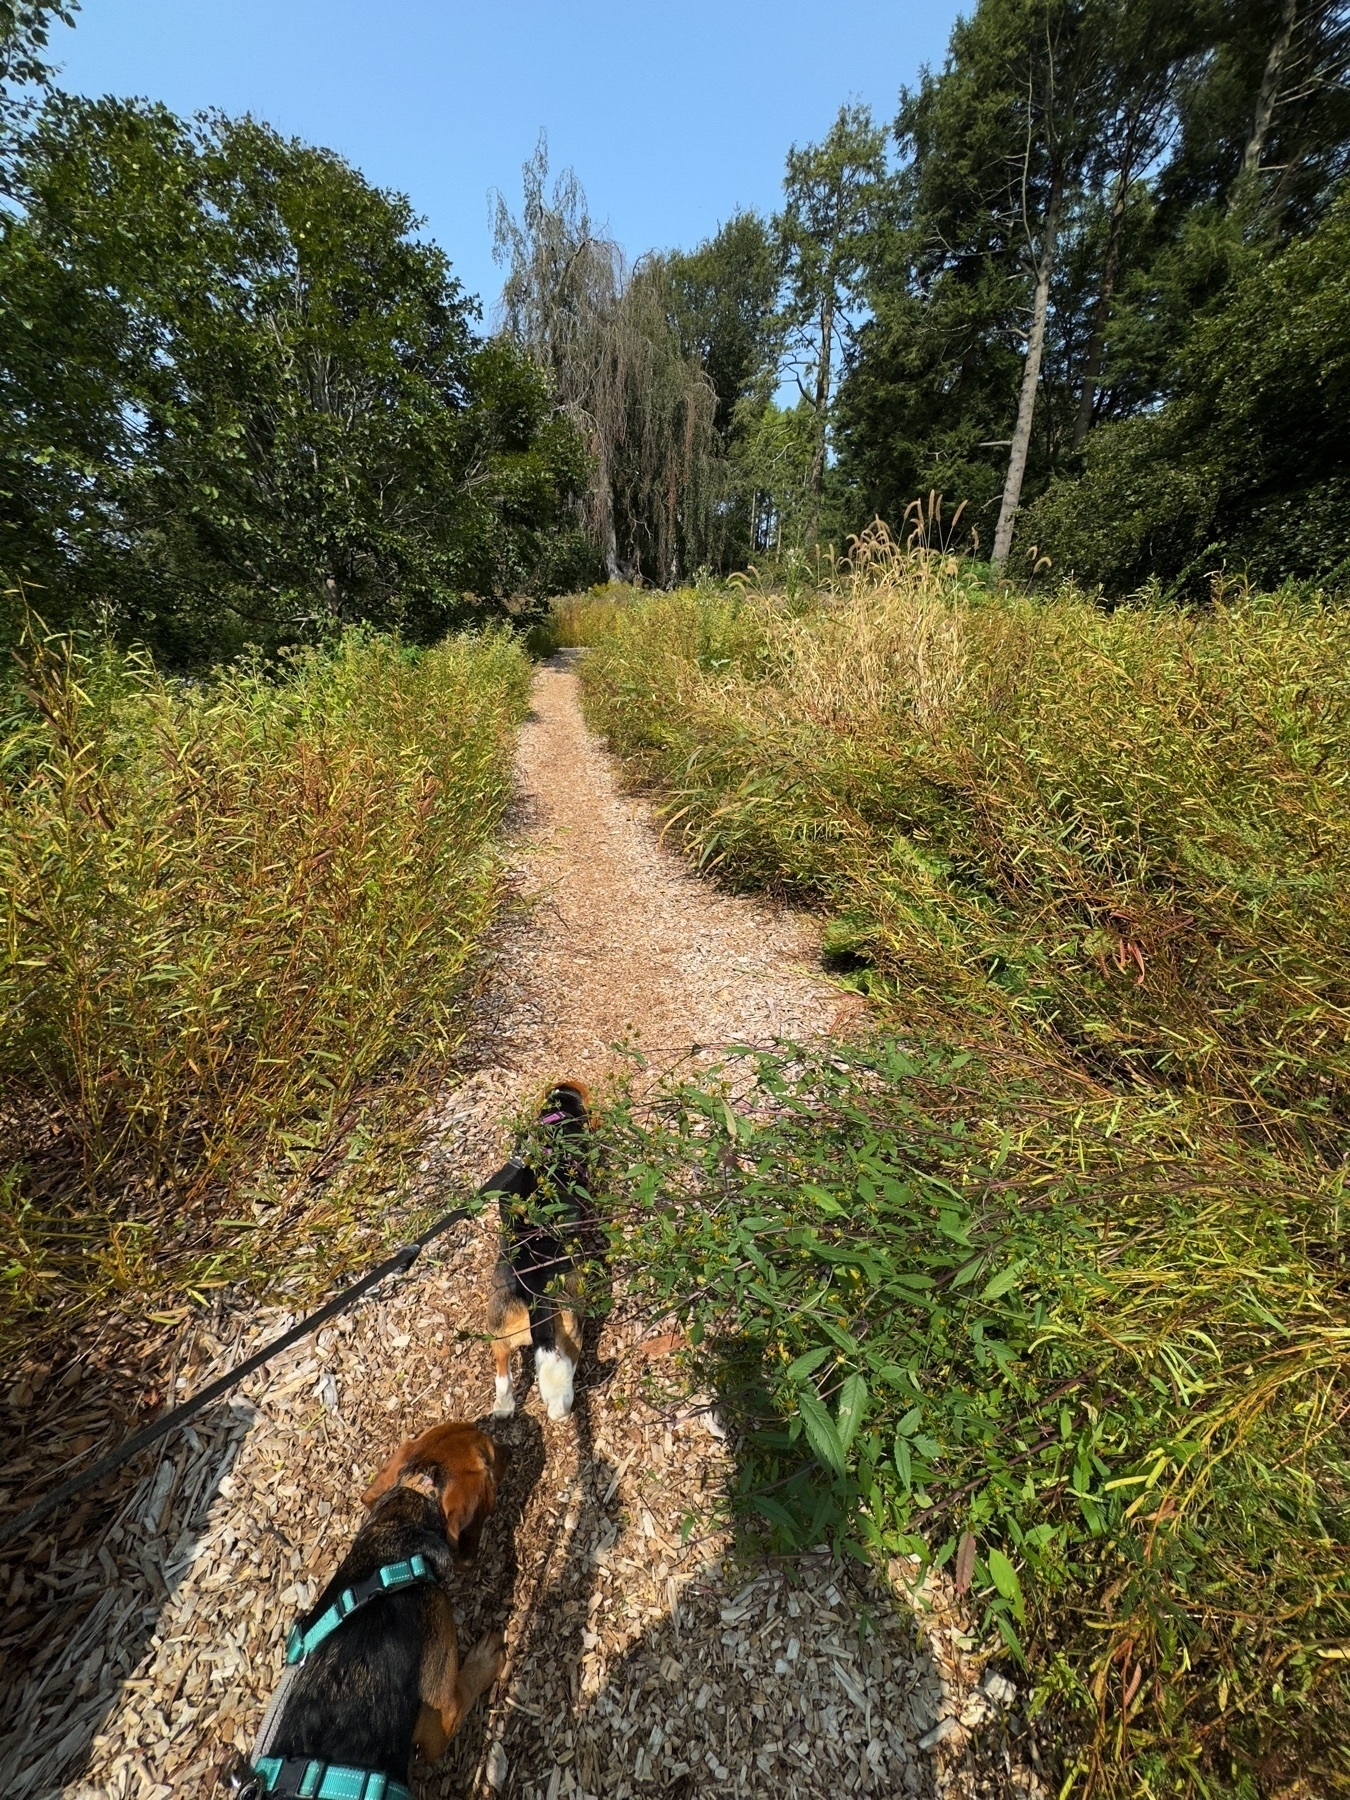 Letting The Beagles pull me up a hill. Cedar path with grass and lavender on either side.